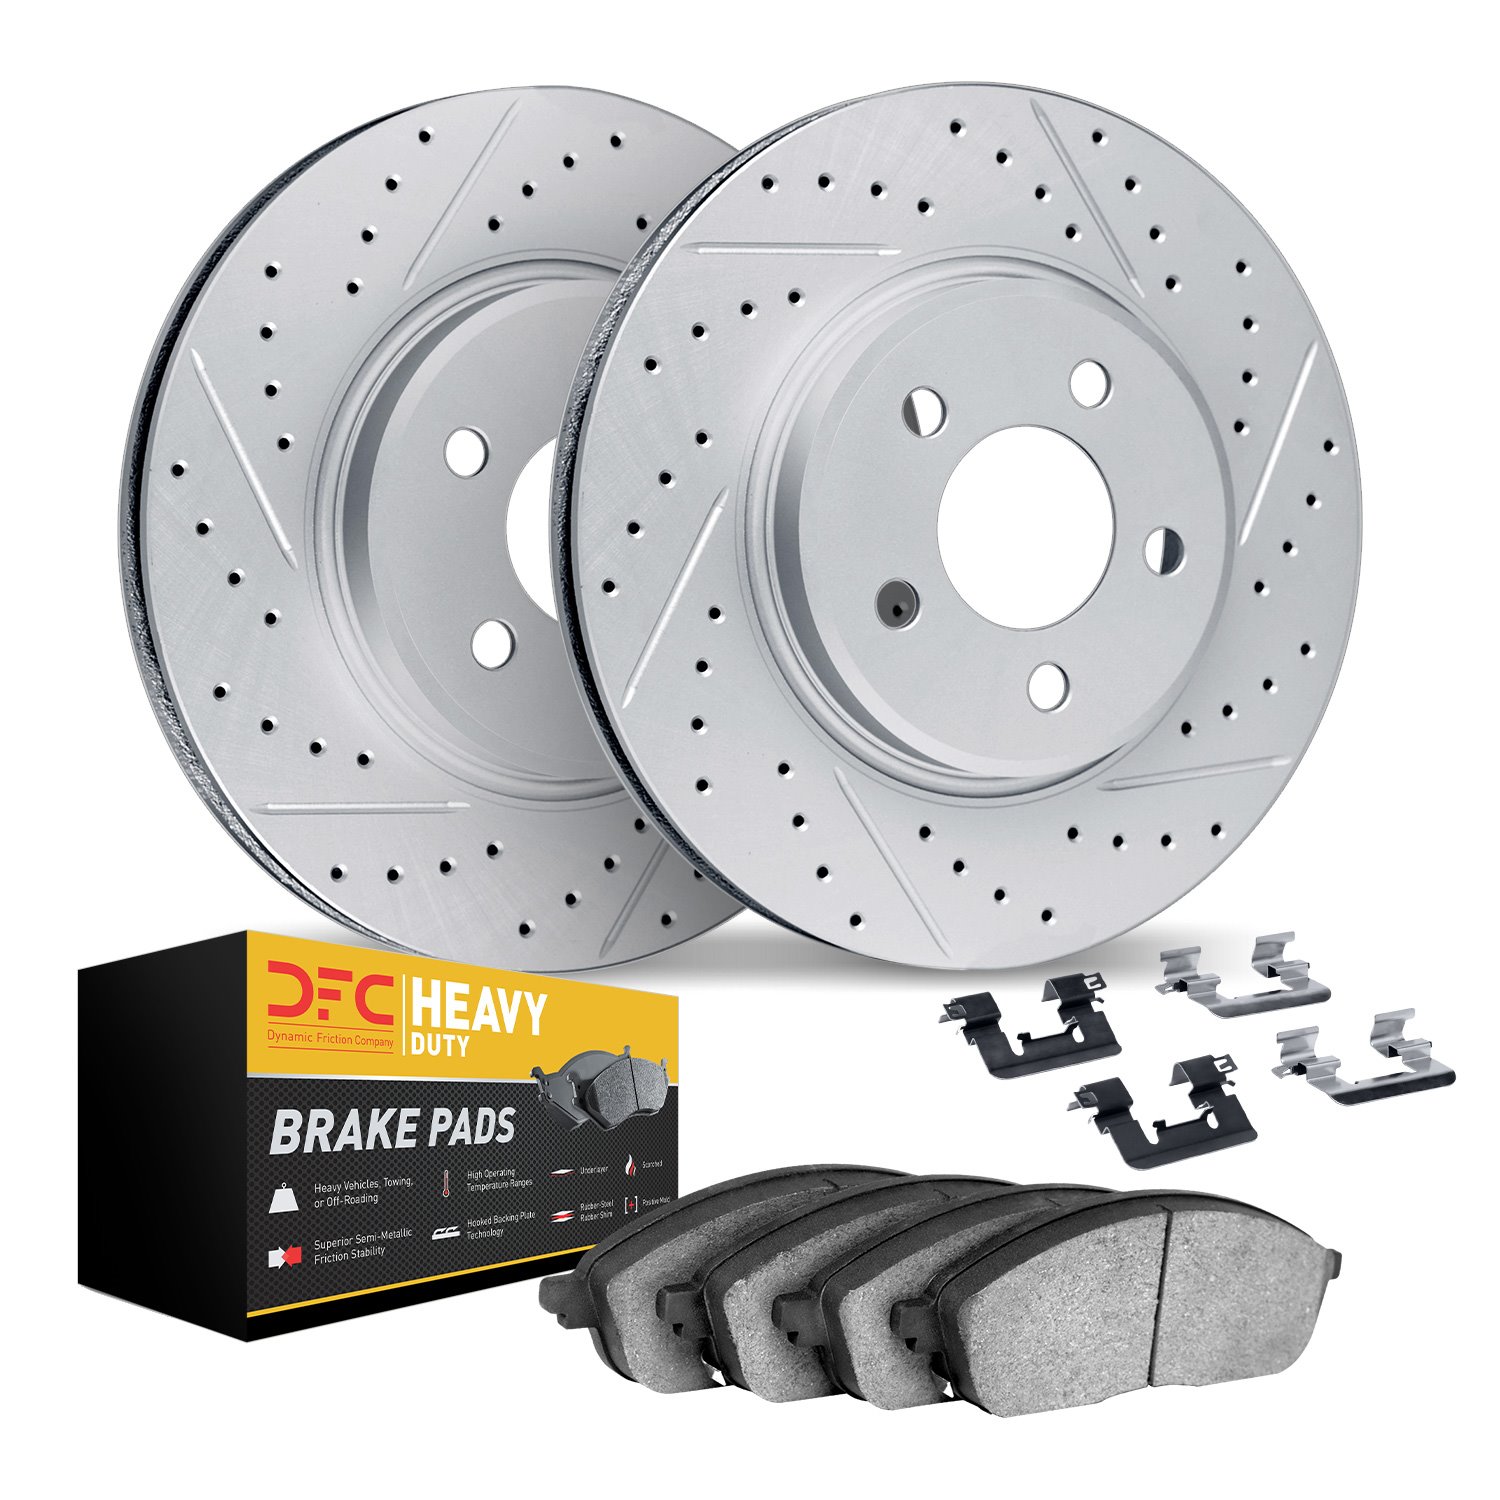 2212-99078 Geoperformance Drilled/Slotted Rotors w/Heavy-Duty Pads Kit & Hardware, 1994-2001 Ford/Lincoln/Mercury/Mazda, Positio